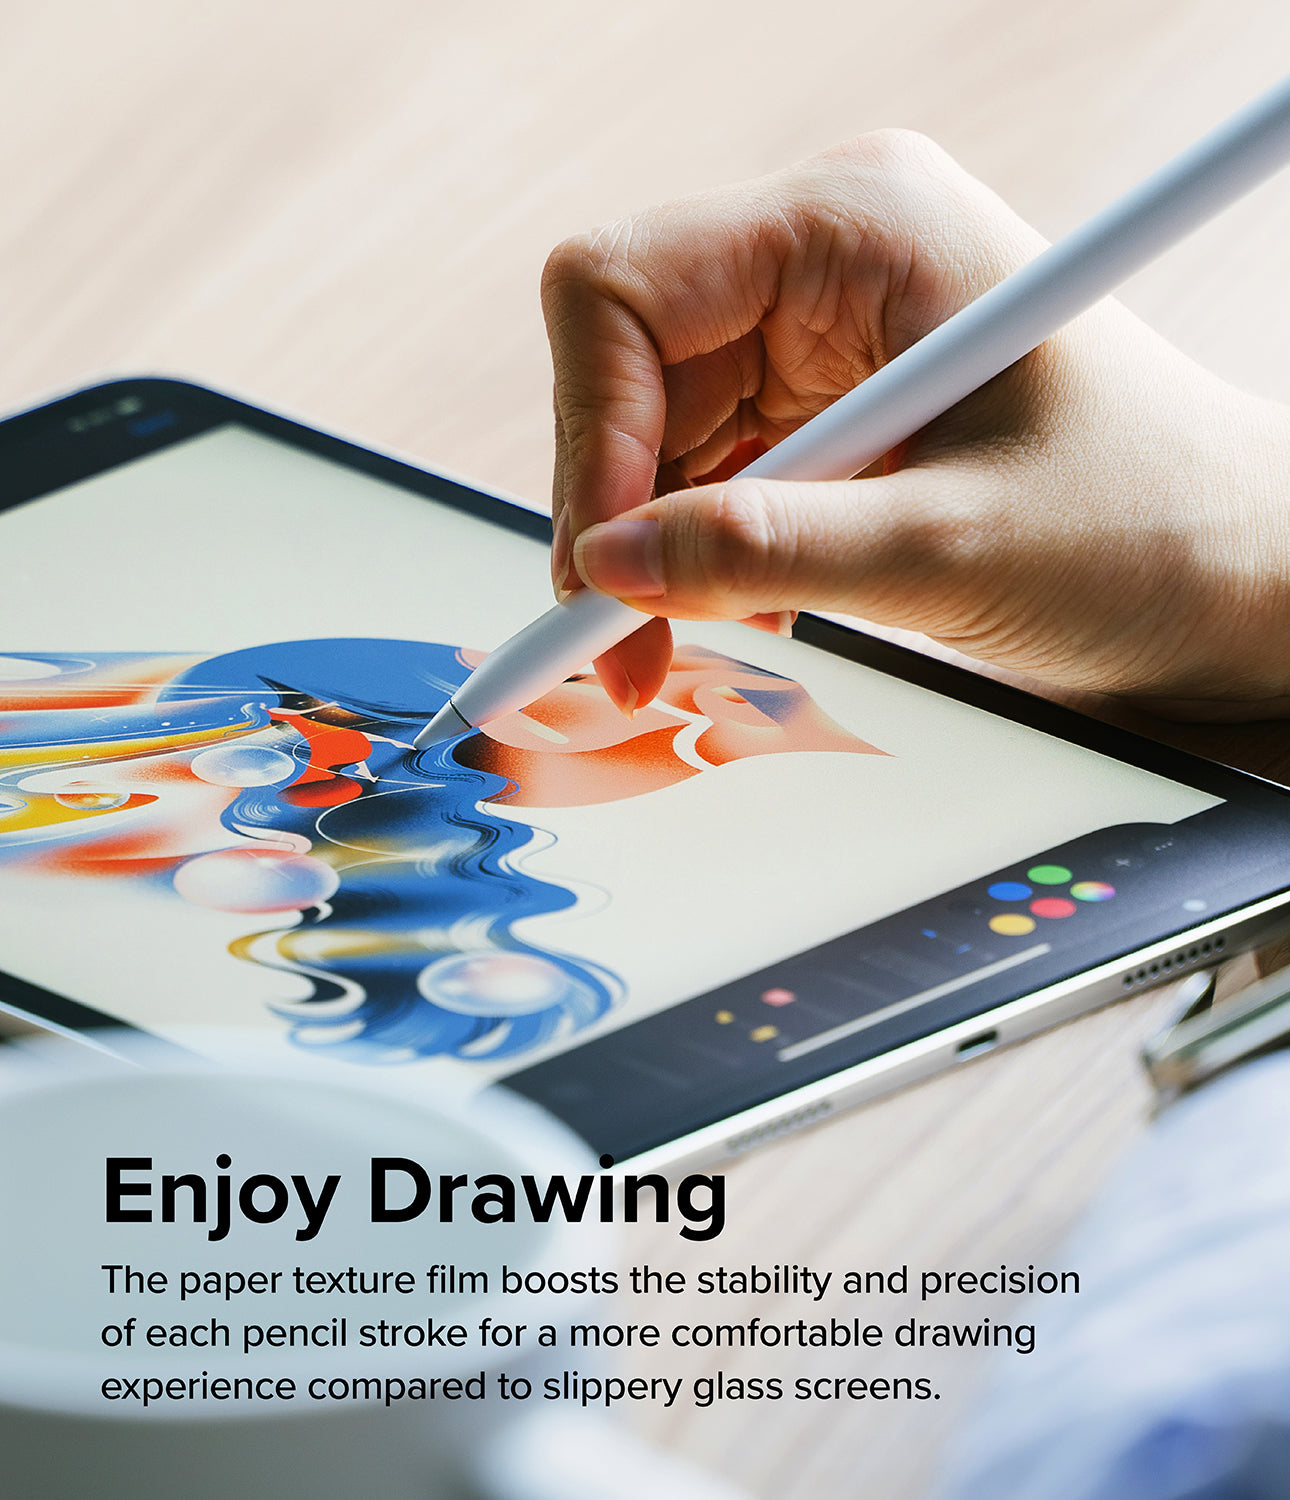 iPad Pro 13" (M4) Screen Protector | Paper Touch Film - Soft - Enjoy Drawing. The paper texture film boosts the stability and precision of each pencil stroke for a more comfortable drawing experience compared to slippery glass screens.